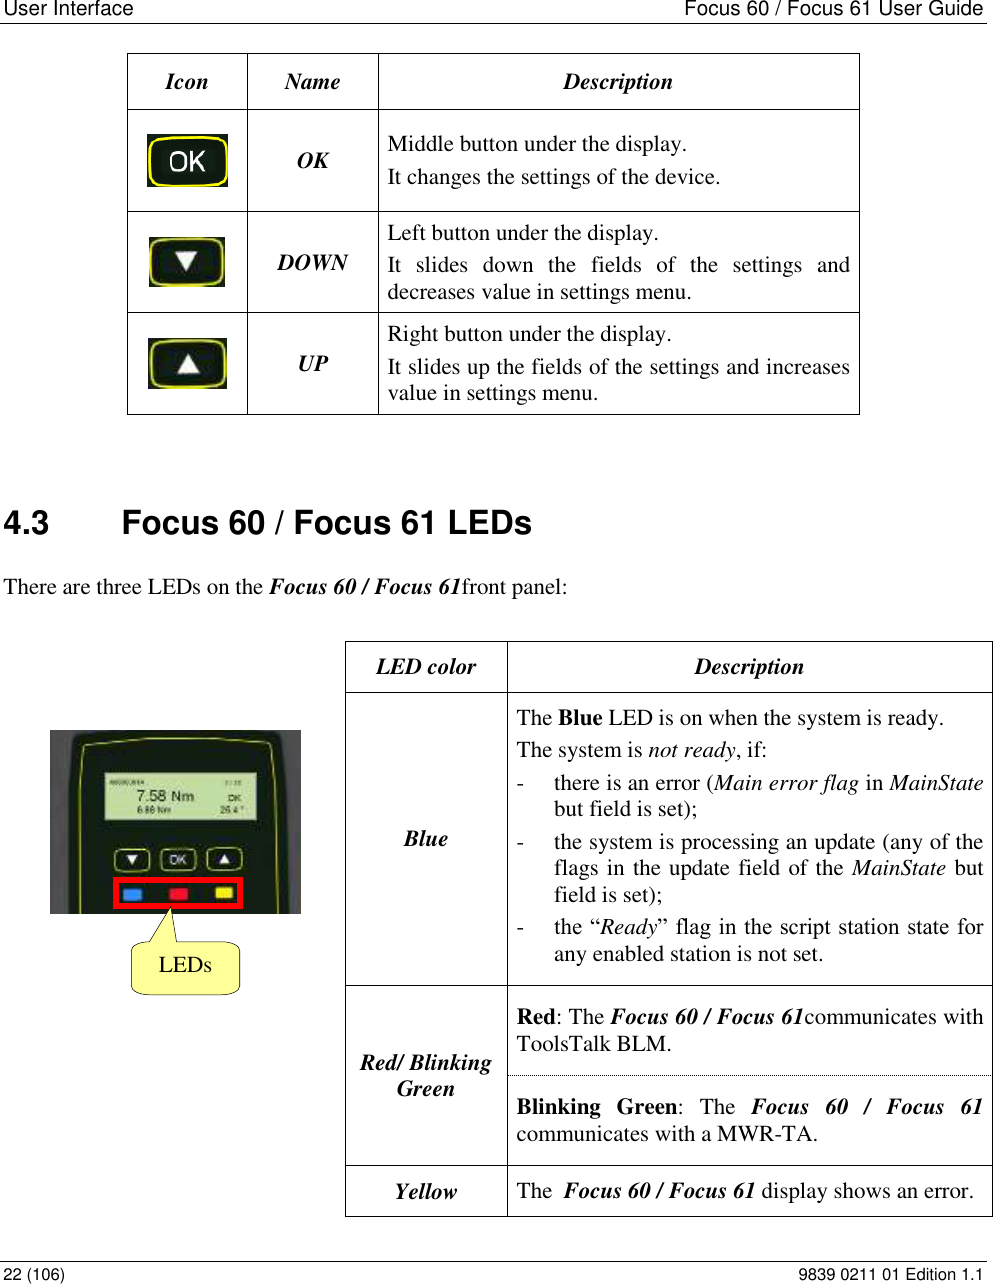 User Interface  Focus 60 / Focus 61 User Guide 22 (106)  9839 0211 01 Edition 1.1 4.3  Focus 60 / Focus 61 LEDs There are three LEDs on the Focus 60 / Focus 61front panel:         Icon Name Description  OK Middle button under the display.  It changes the settings of the device.  DOWN Left button under the display.  It  slides  down  the  fields  of  the  settings  and decreases value in settings menu.  UP Right button under the display.  It slides up the fields of the settings and increases value in settings menu. LED color Description Blue The Blue LED is on when the system is ready. The system is not ready, if: - there is an error (Main error flag in MainState but field is set); - the system is processing an update (any of the flags in the update field of the MainState but field is set); - the “Ready” flag in the script station state for any enabled station is not set. Red/ Blinking Green Red: The Focus 60 / Focus 61communicates with ToolsTalk BLM. Blinking  Green:  The  Focus  60  /  Focus  61 communicates with a MWR-TA. Yellow The  Focus 60 / Focus 61 display shows an error. LEDs 